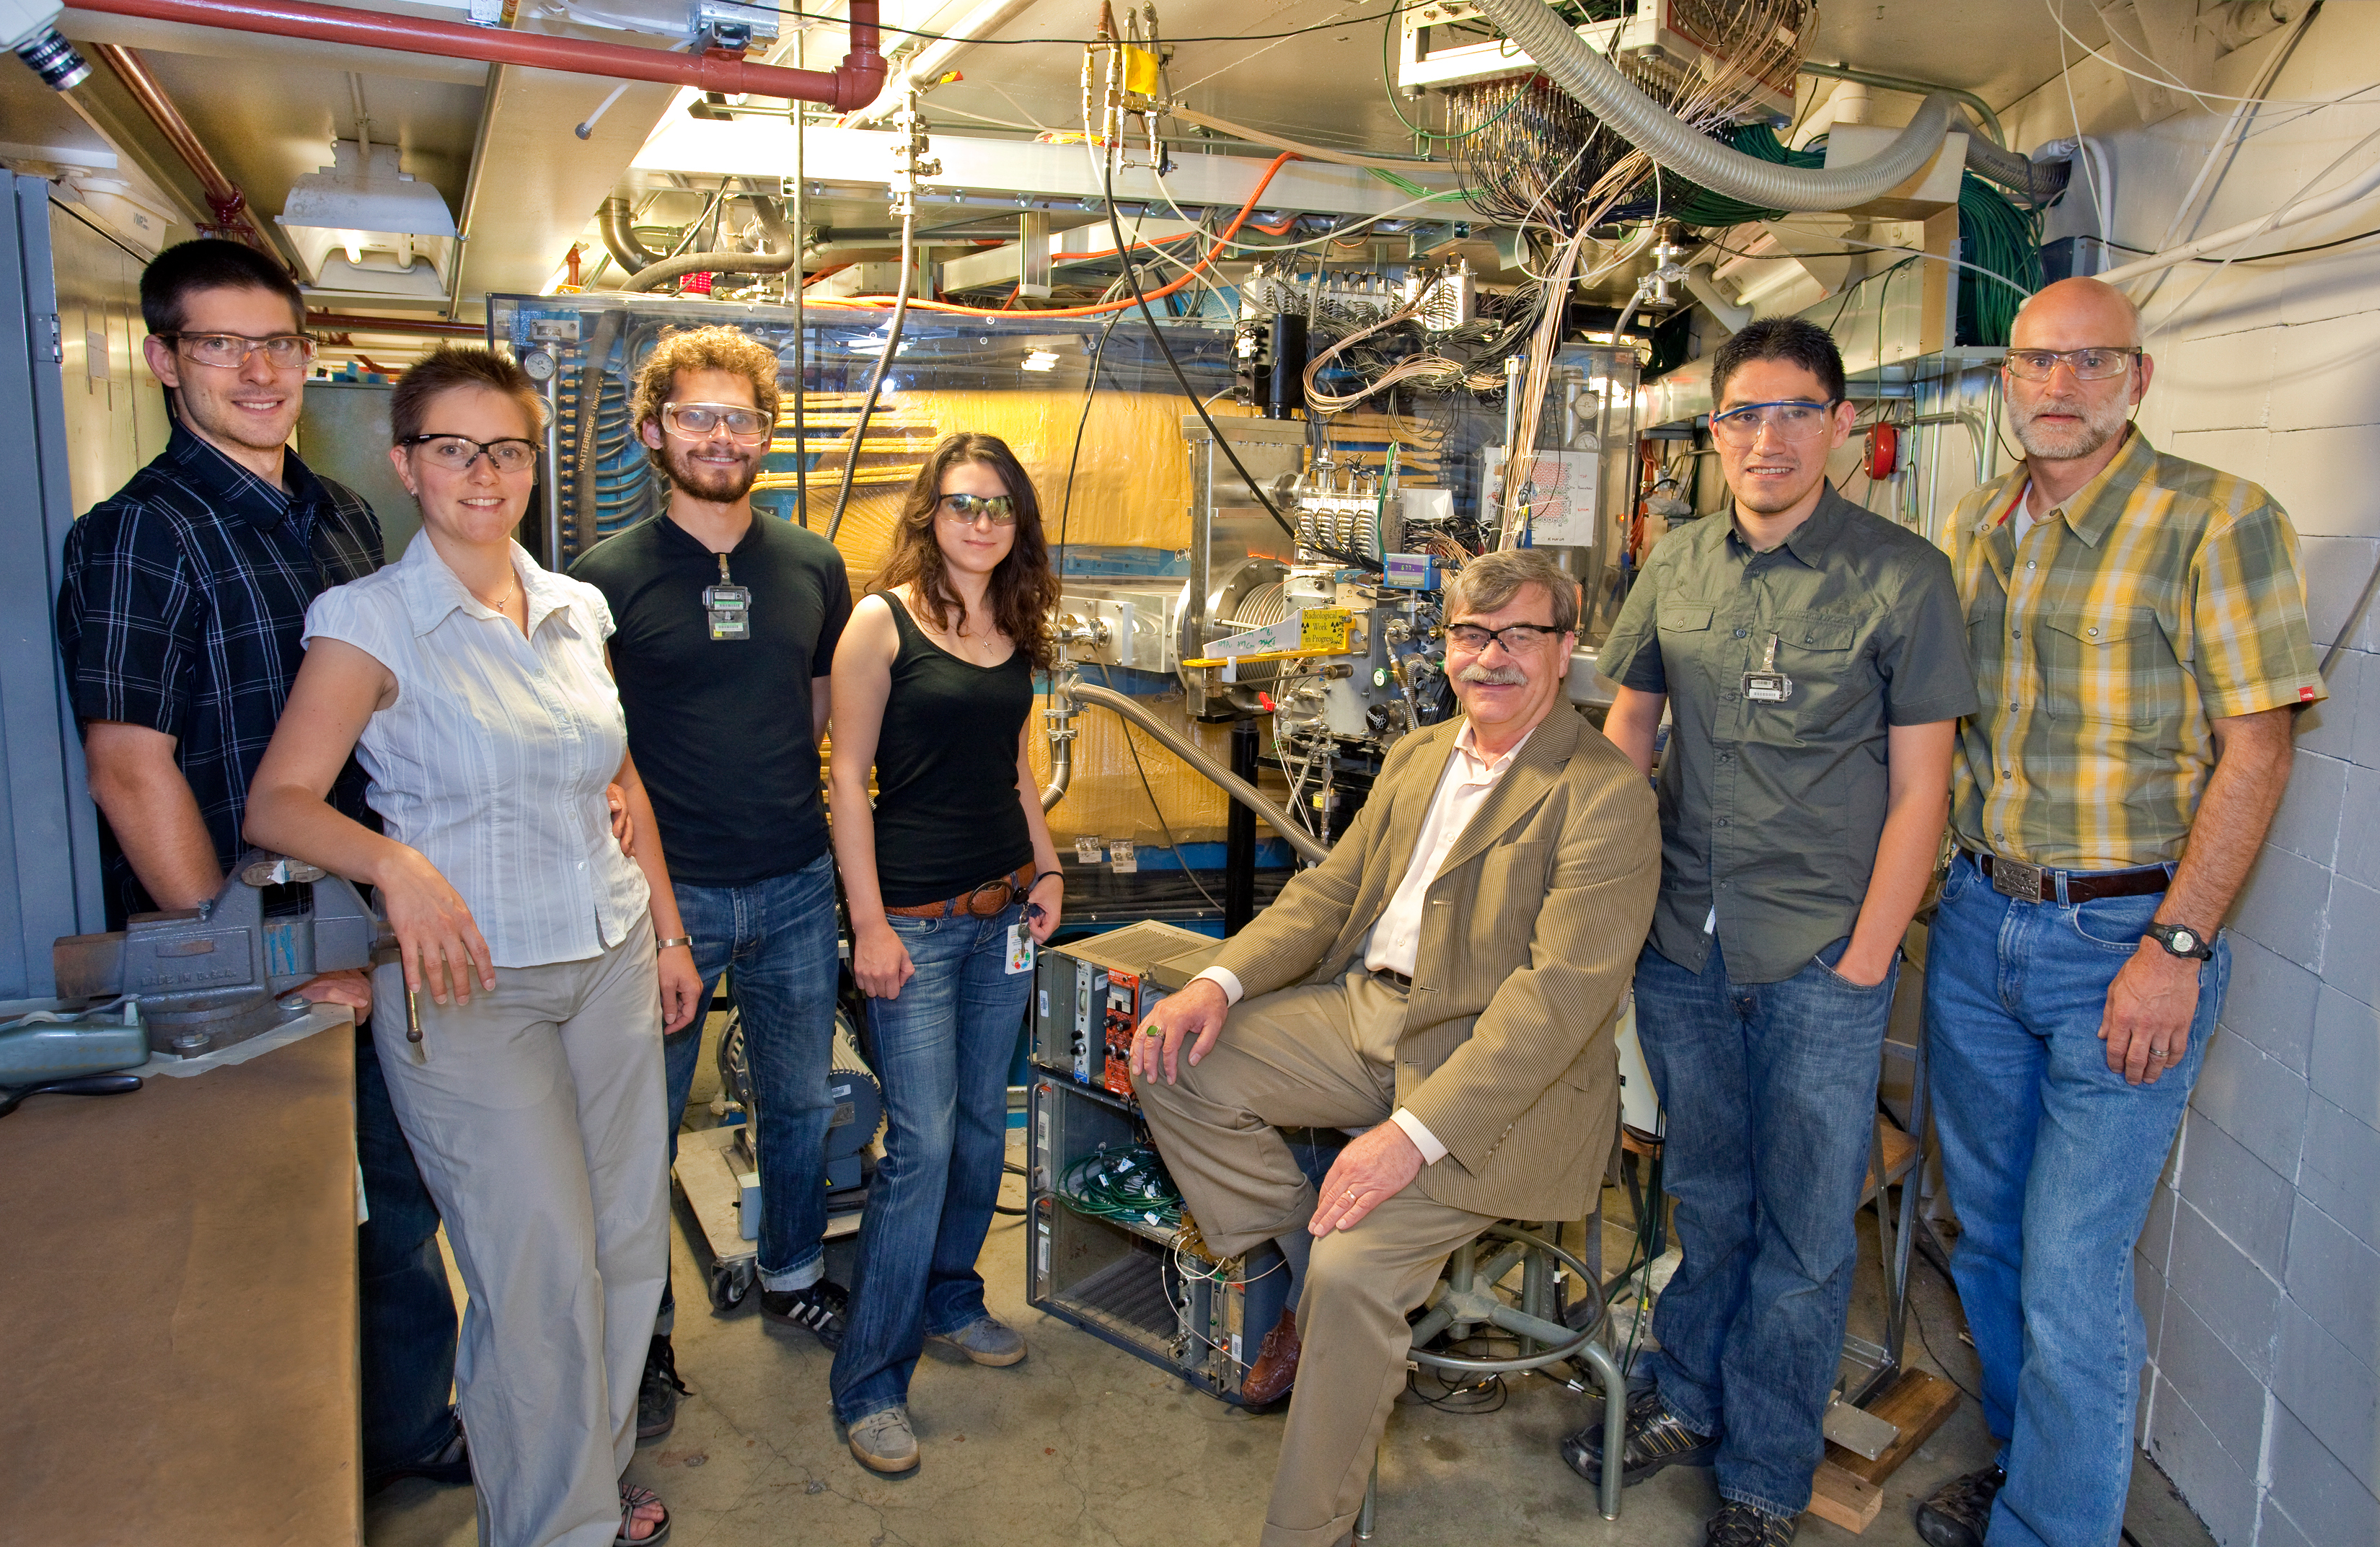 Members of the group that confirmed the production of element 114 in front of the Berkeley Gas-filled Separator at the 88-Inch Cyclotron, from left: Jan Dvorak, Zuzana Dvorakova, Paul Ellison, Irena Dragojevic, Heino Nitsche, Mitch Andre Garcia, and Ken Gregorich. Not pictured in Liv Stavestra. (Photo by Roy Kaltschmidt, Berkeley Lab Creative Services Office. For best resolution, click on image.) 